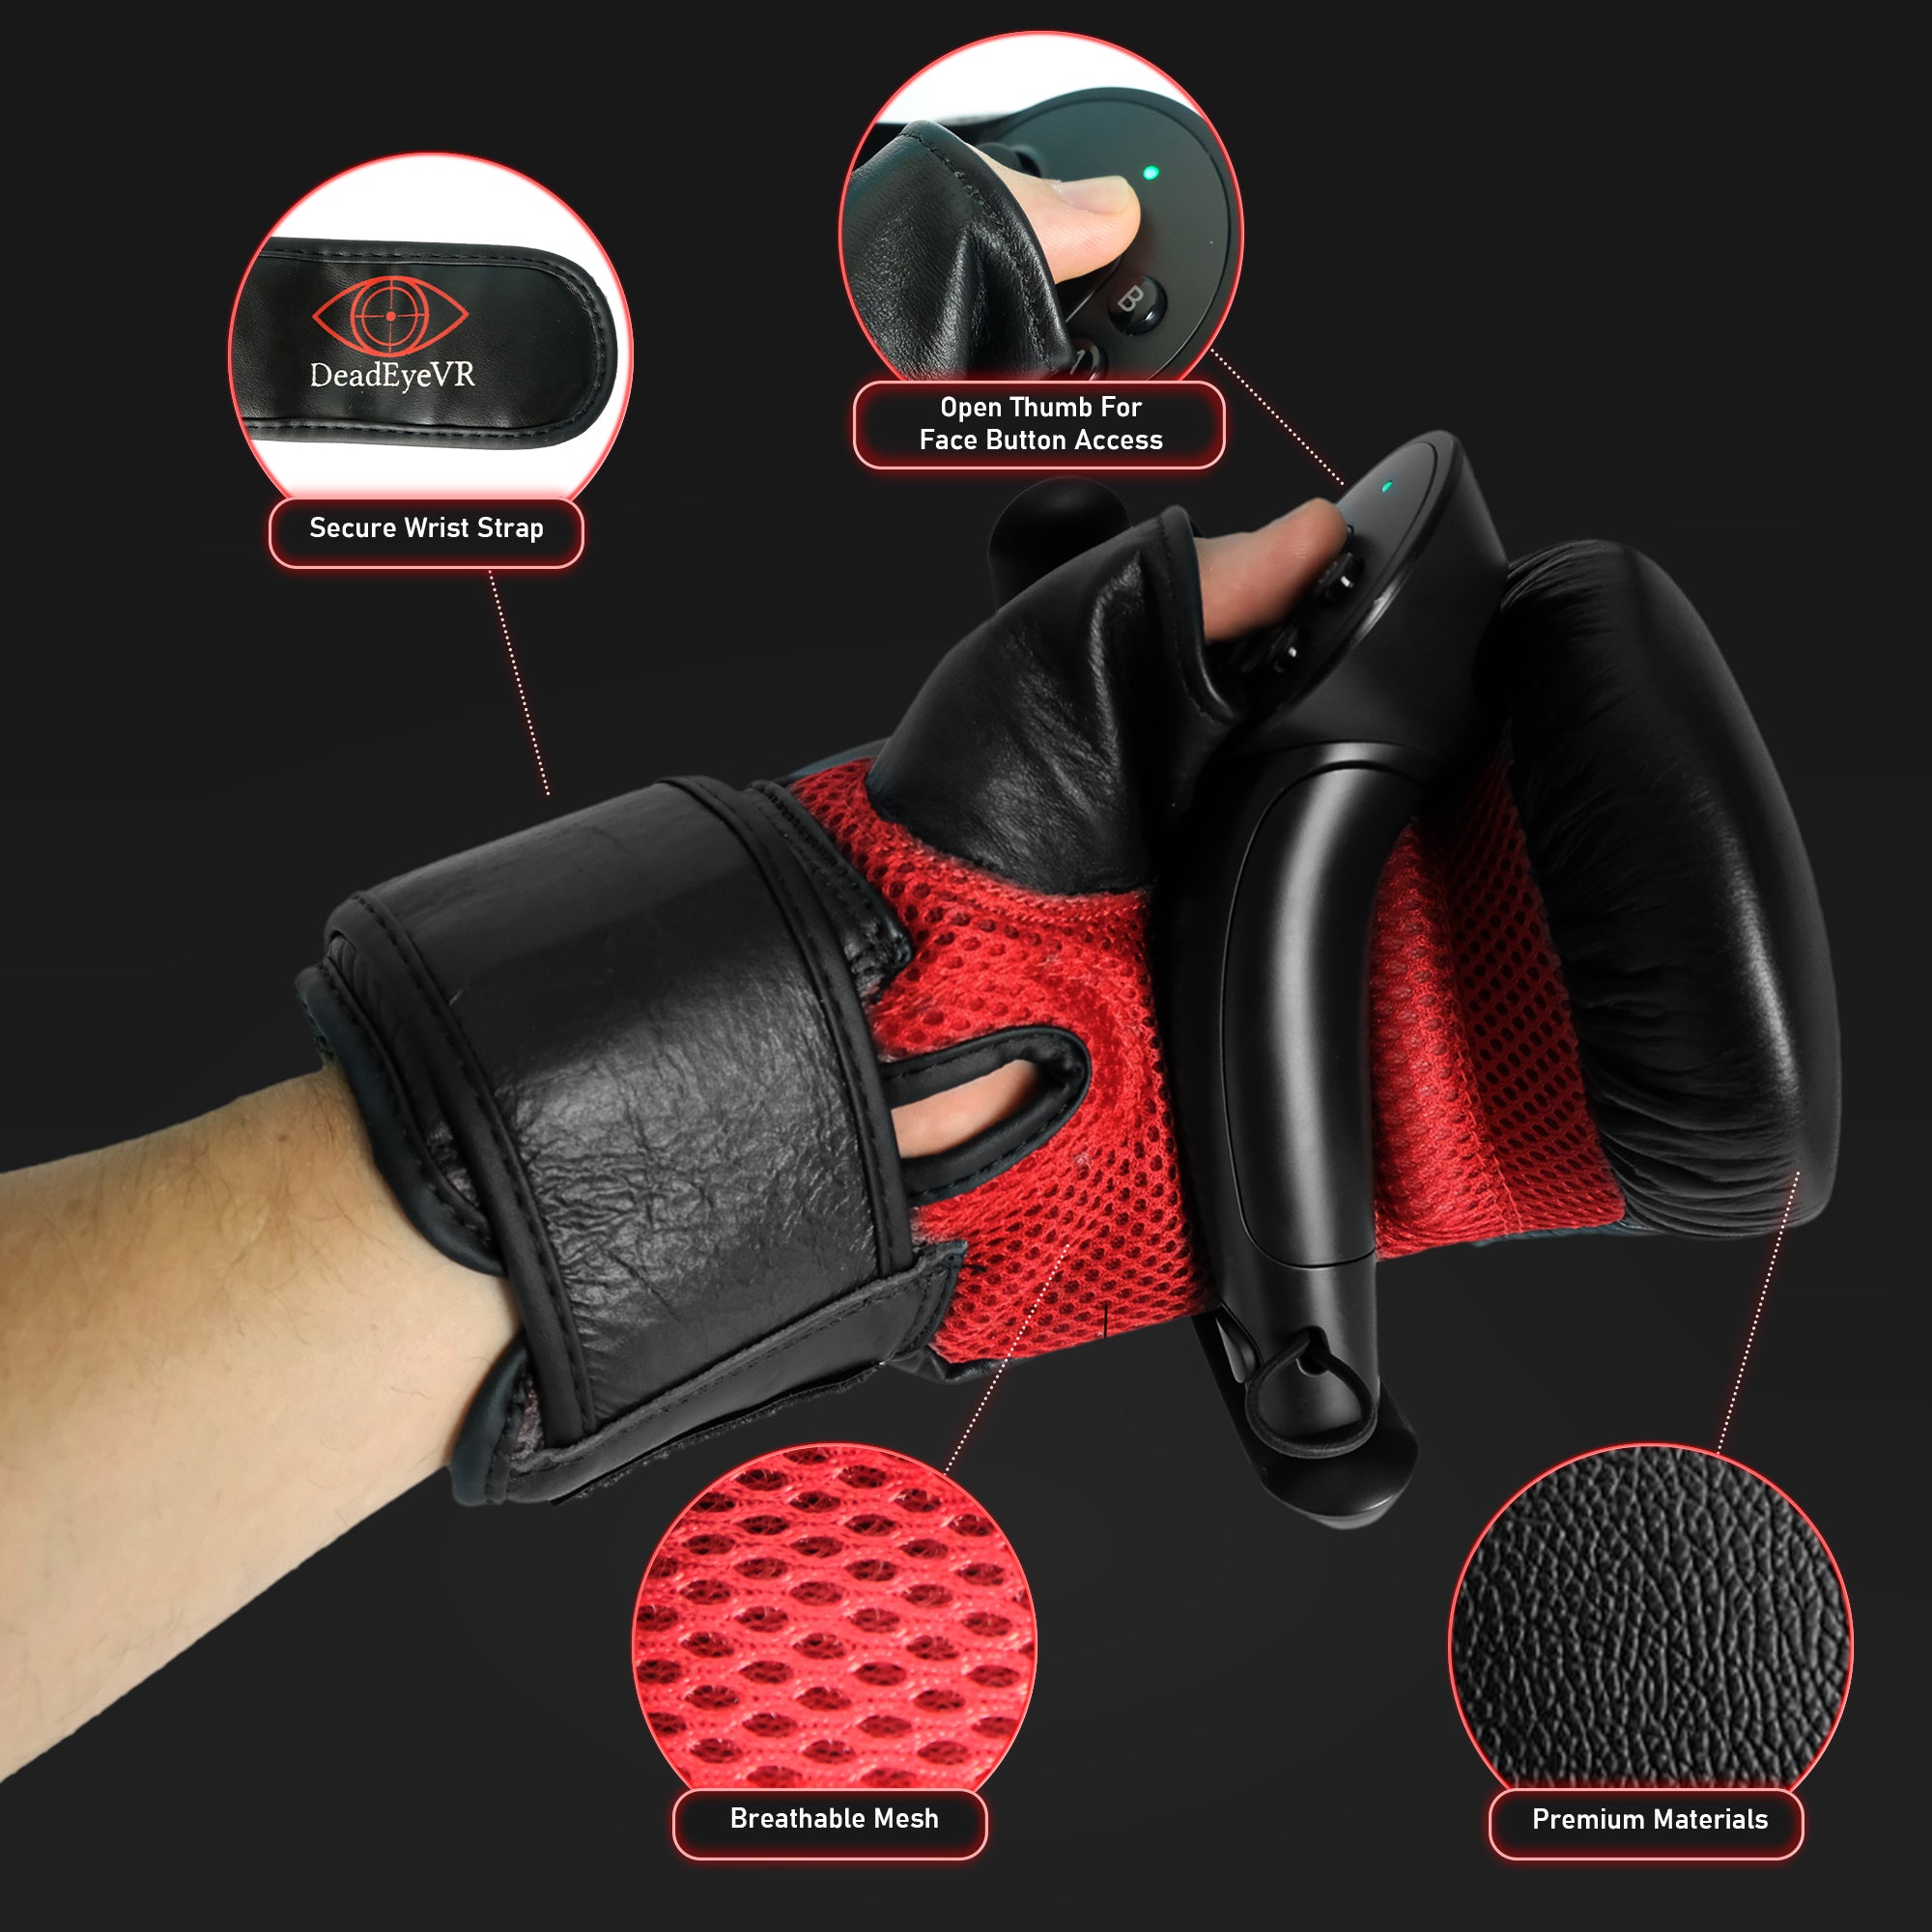 Ultimate Boxing Gloves - Boxing Mitts for Meta Quest, Quest 2, Oculus Rift S, and Valve Index